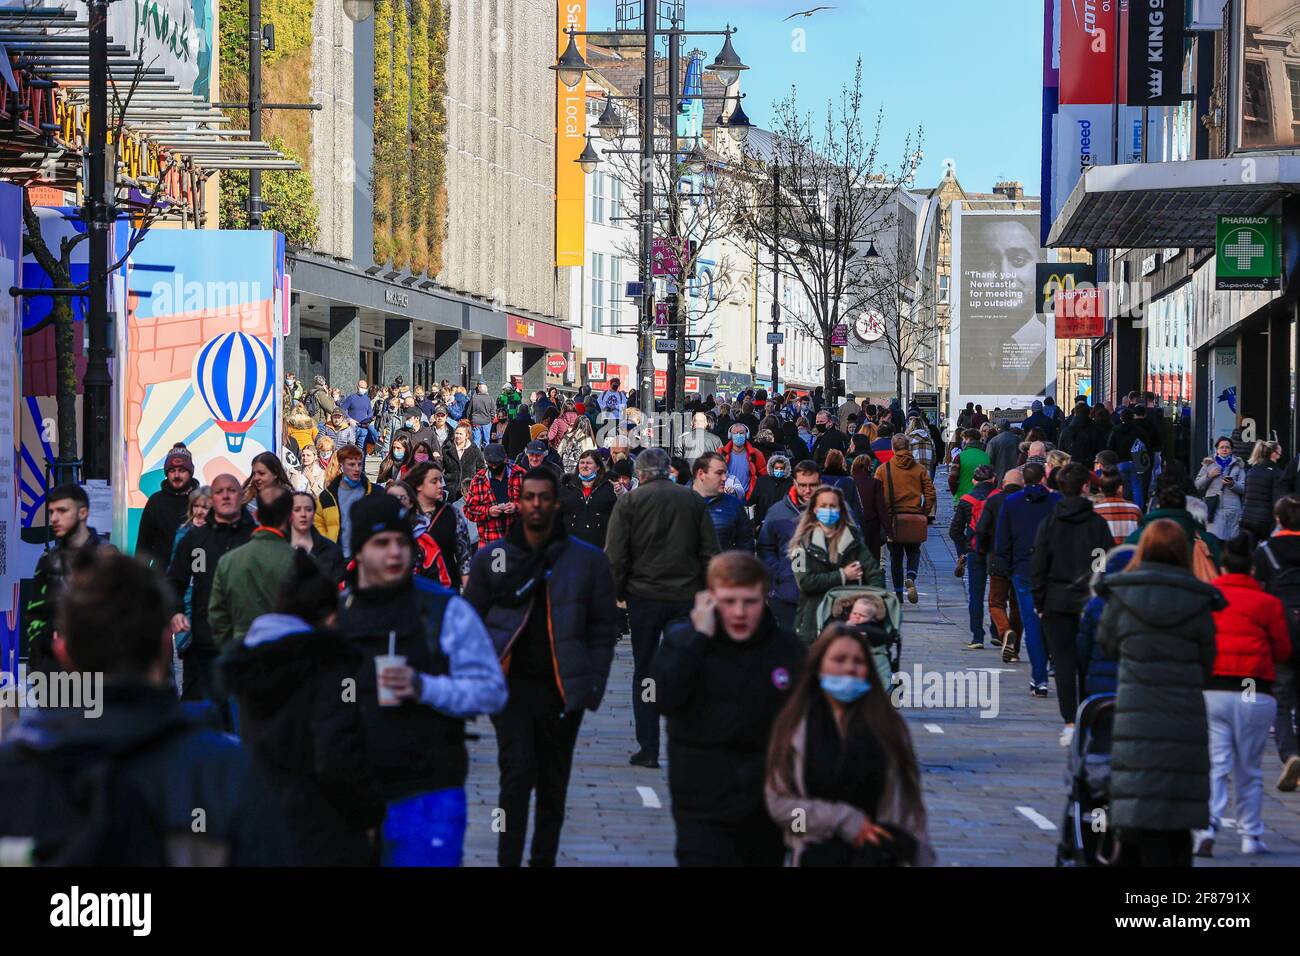 Newcastle Upon Tyne, UK. 12th Apr, 2021. Northumberland Street, Newcastle upon Tyne, is busy with shoppers after national lockdown restrictions are eased and retail premises are allowed to reopen in Newcastle upon Tyne, England on 4/12/2021. (Photo by Iam Burn/News Images/Sipa USA) Credit: Sipa USA/Alamy Live News Stock Photo